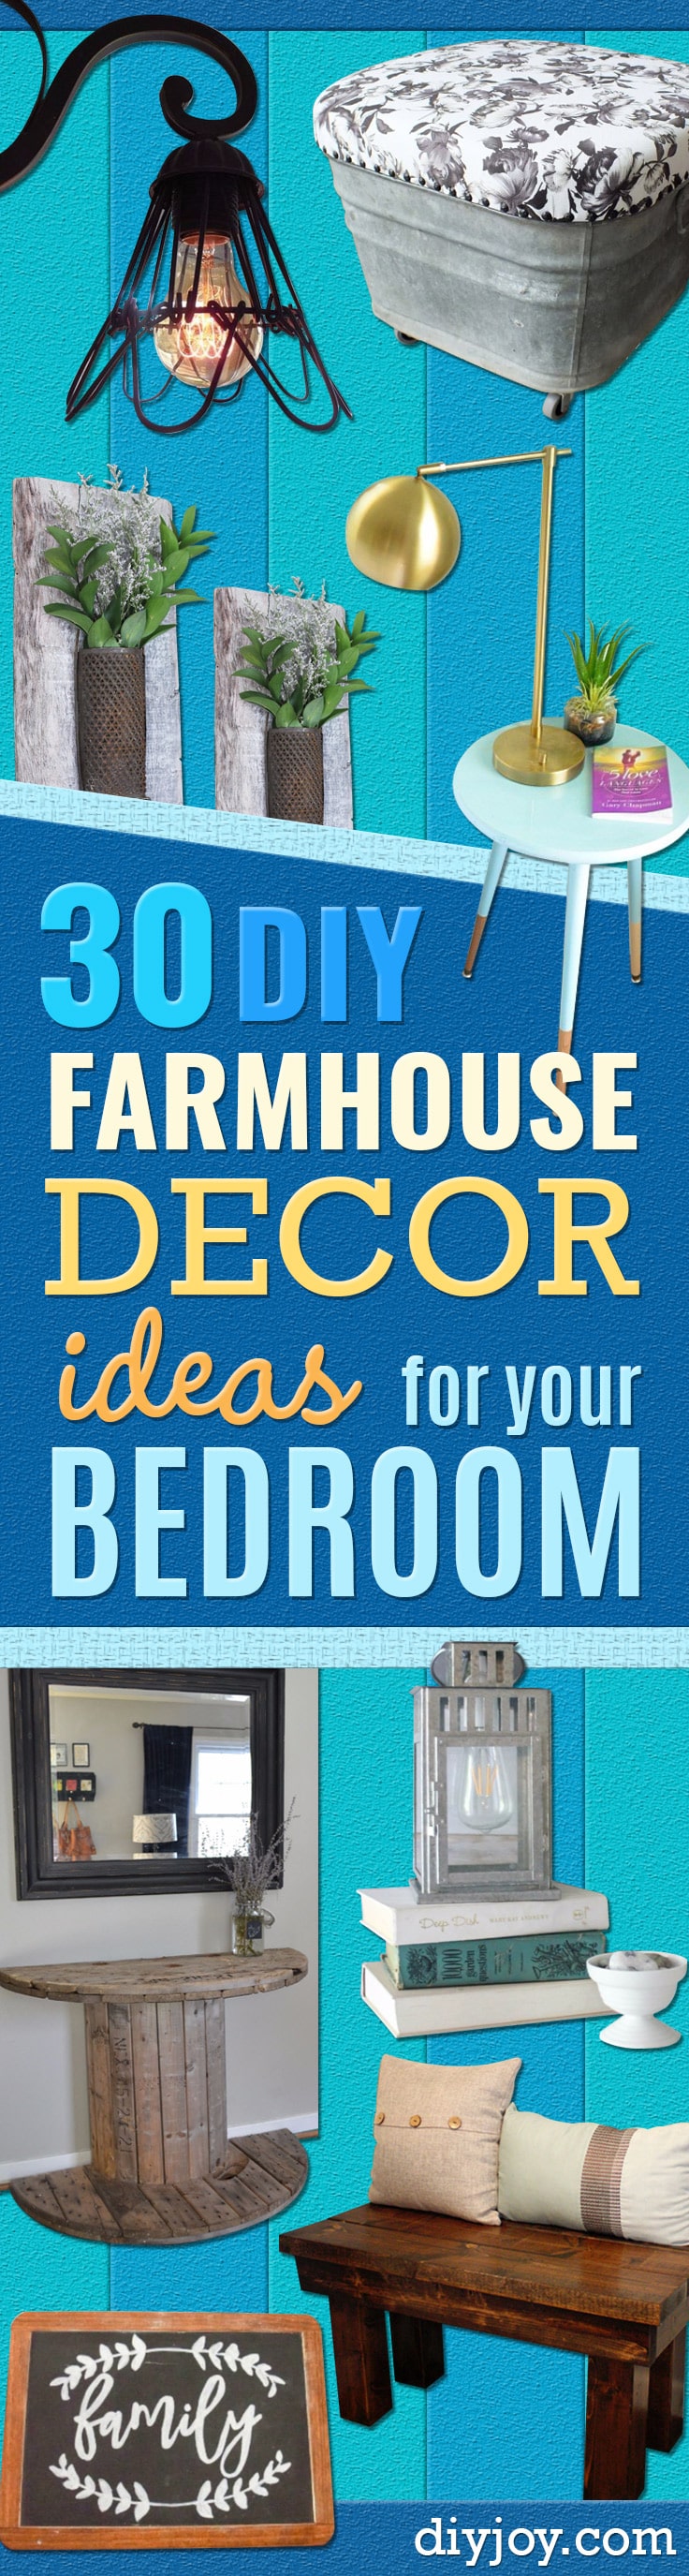 DIY Farmhouse Style Decor Ideas for the Bedroom - Rustic Farm House Ideas for Furniture, Paint Colors, Farm House Decoration for Home Decor in The Bedroom - Wall Art, Rugs, Nightstands, Lights and Room Accessories 